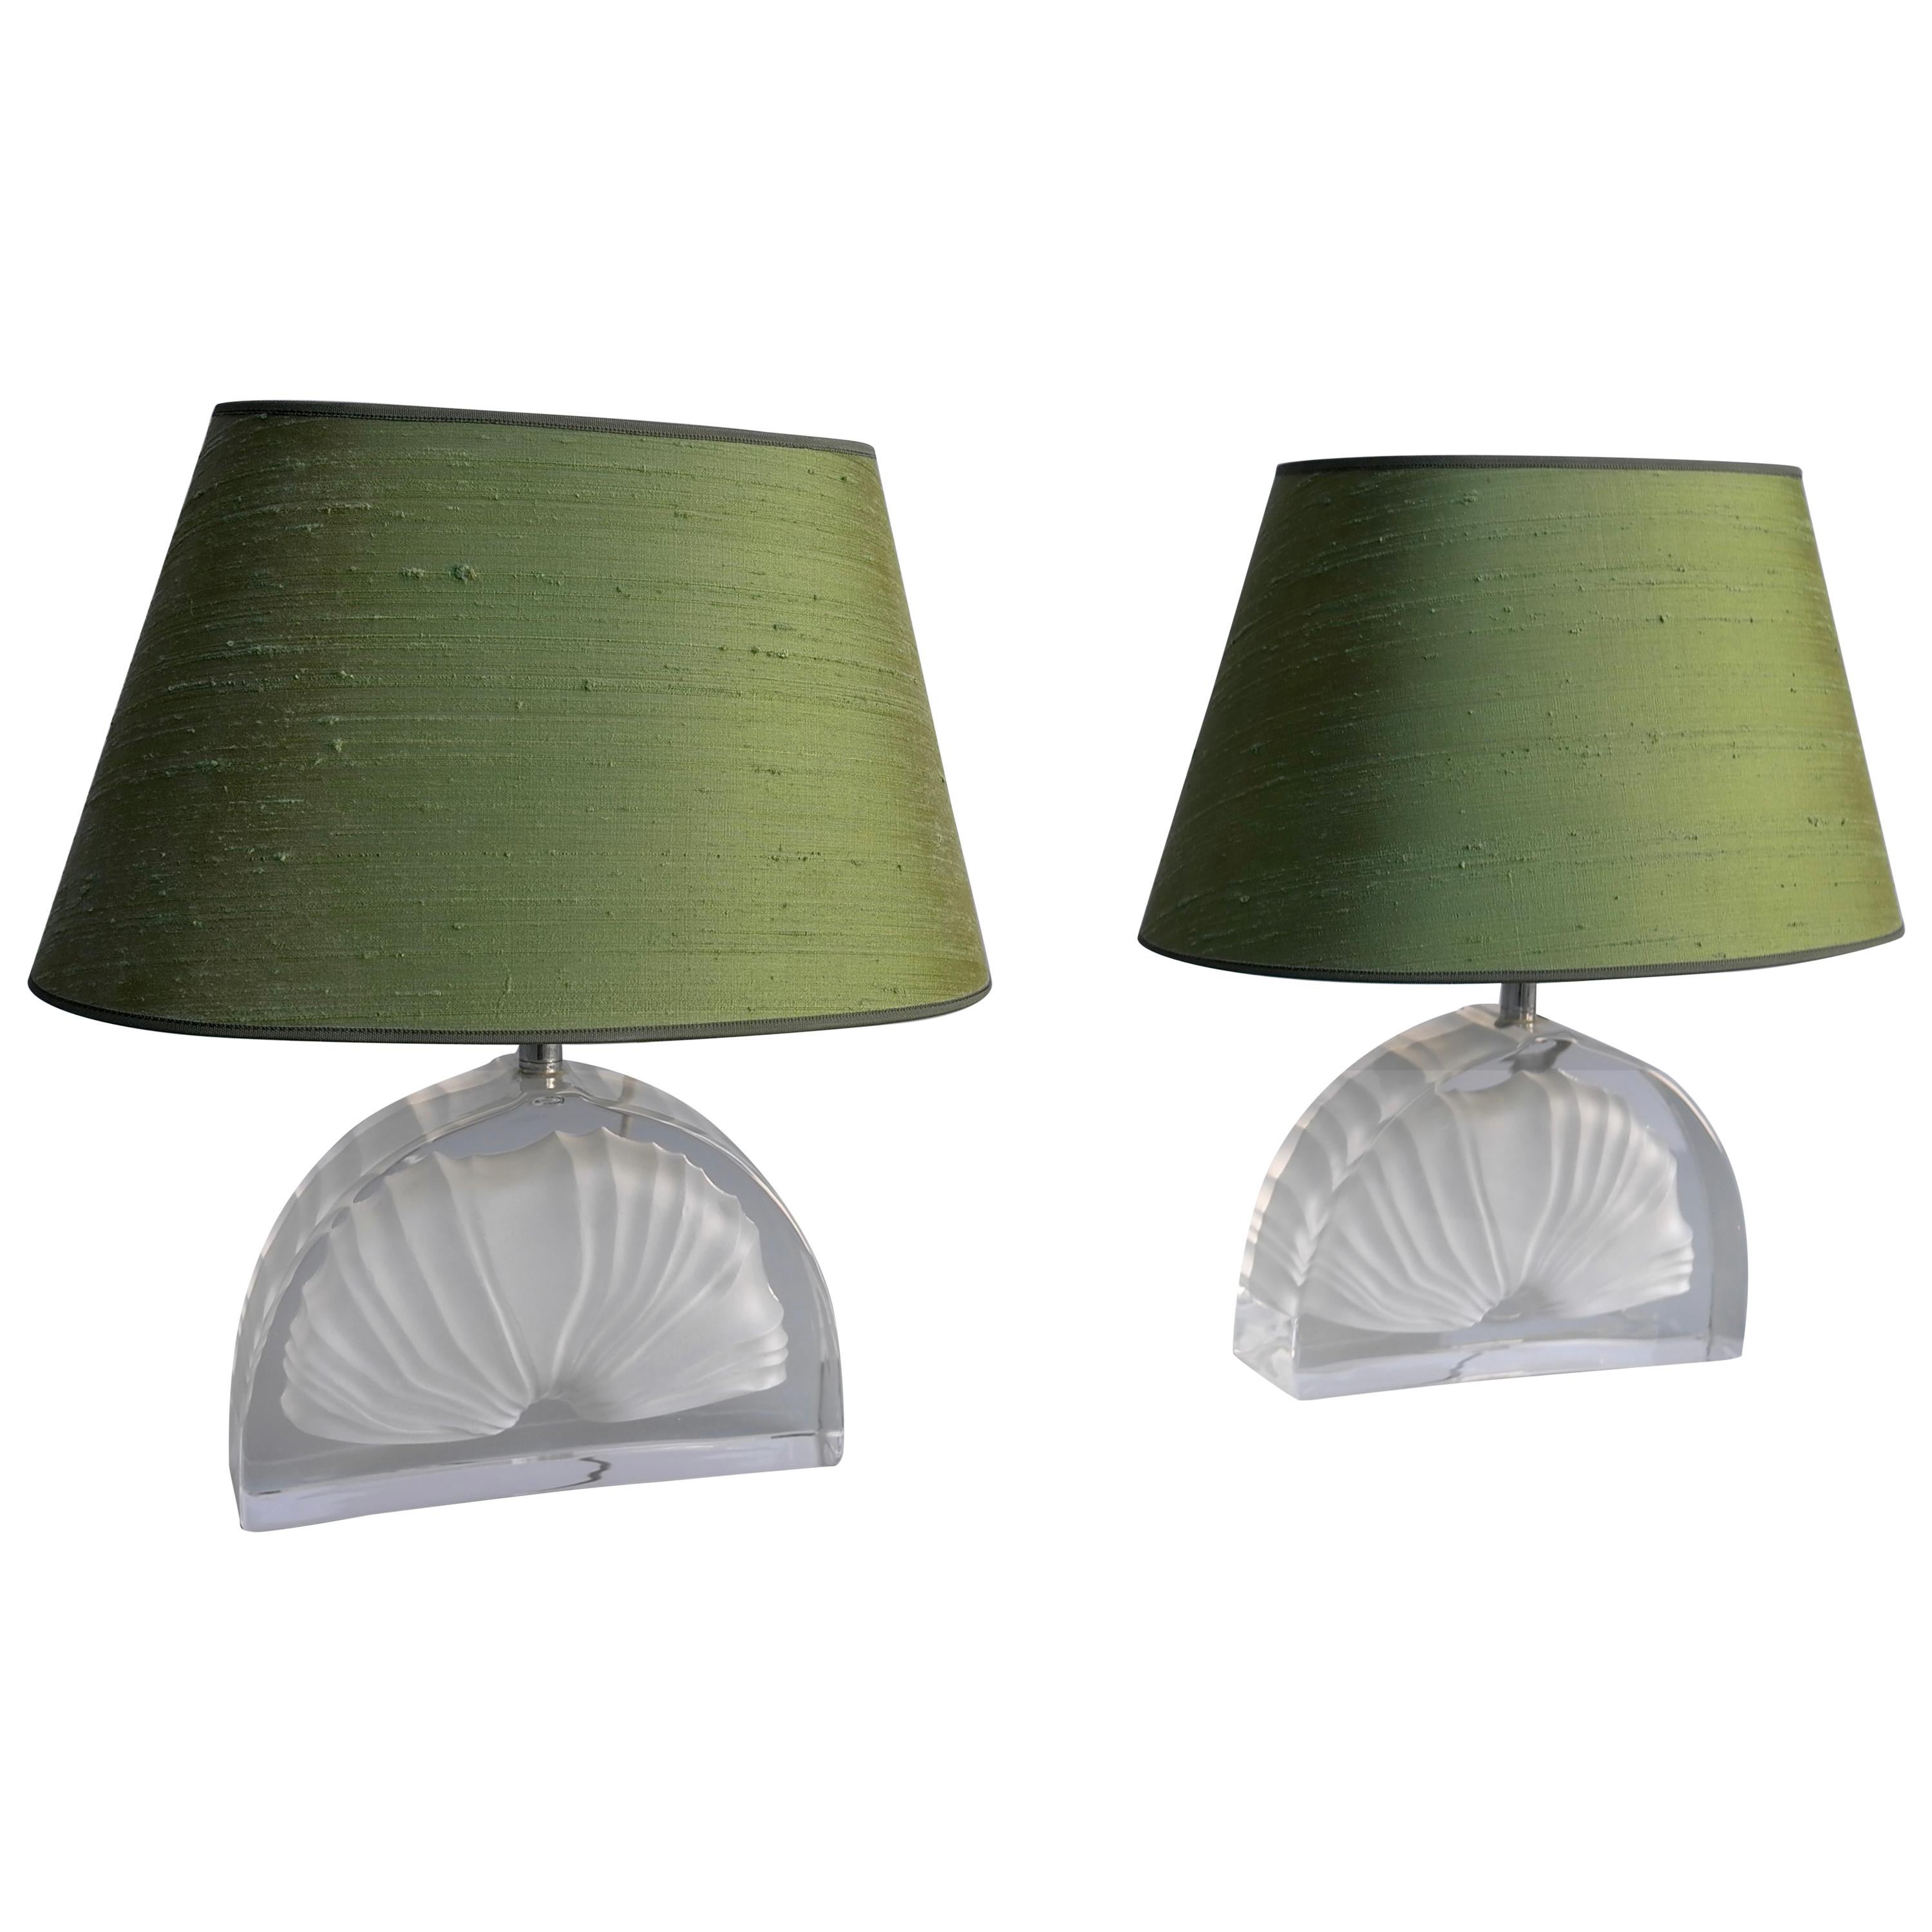 Pair of Fossil Shell Crystal Table Lamps with Green Silk Shades by Daum France